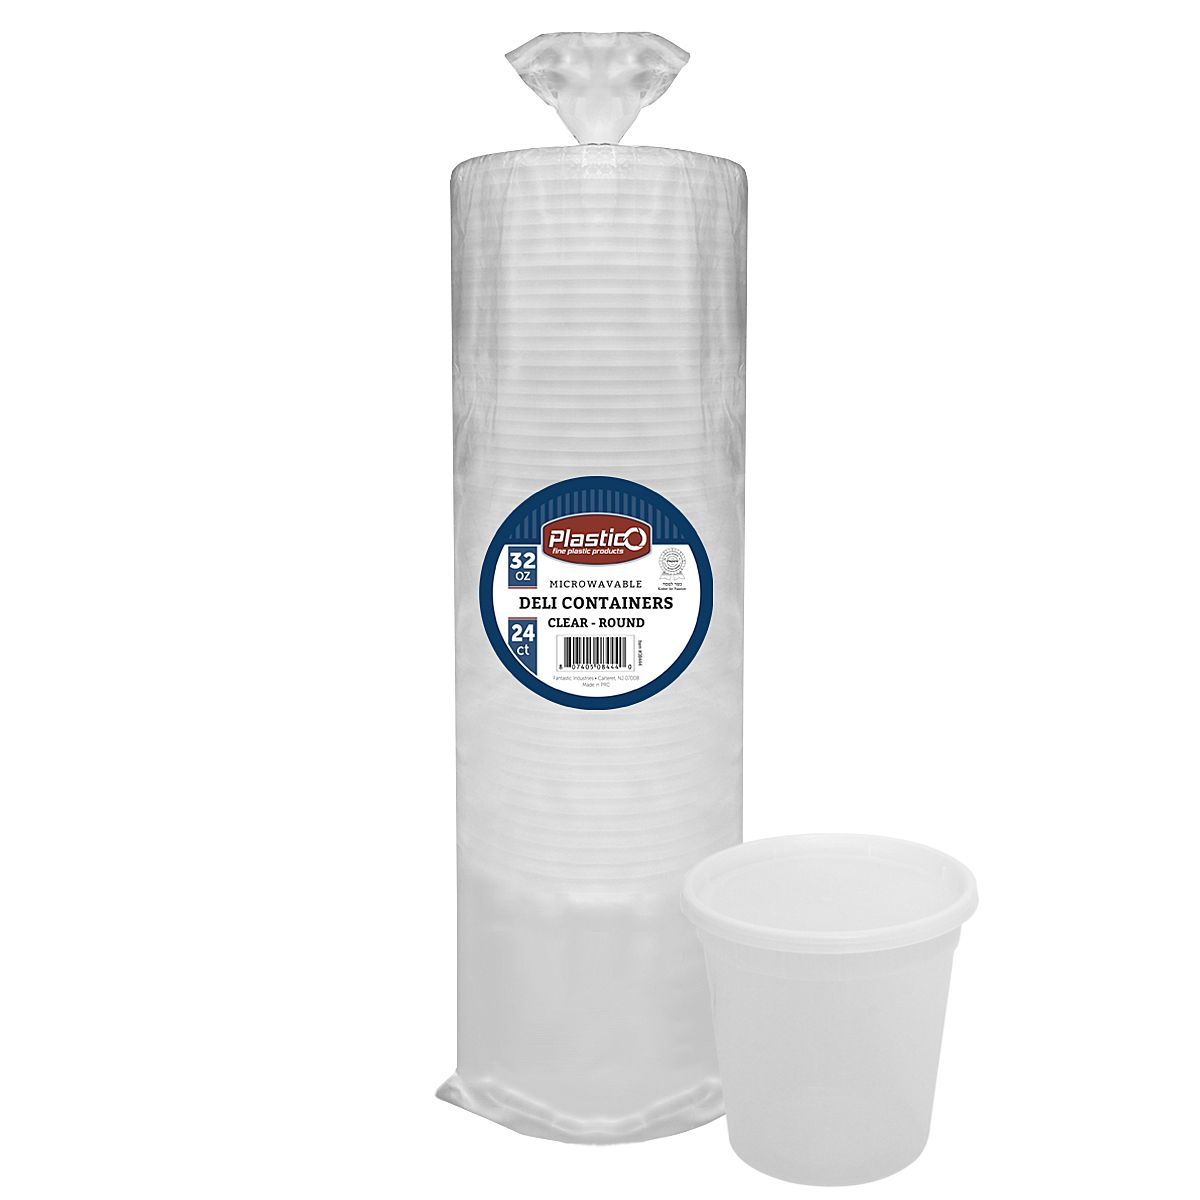  32 oz Deli Containers with Lids 240 Bulk Pack